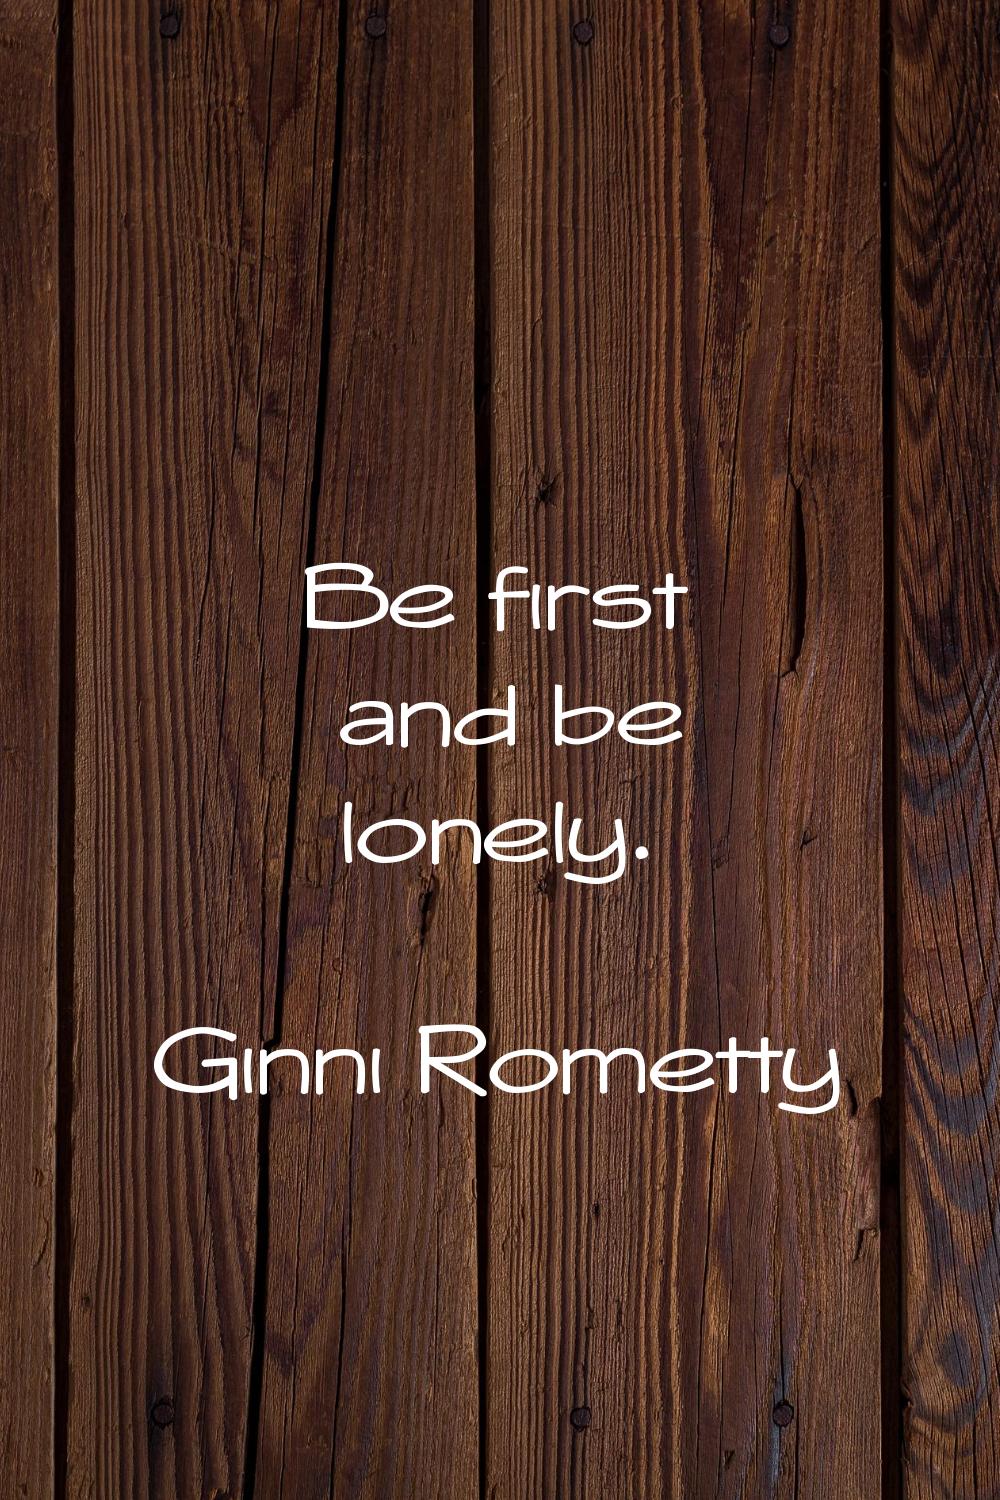 Be first and be lonely.